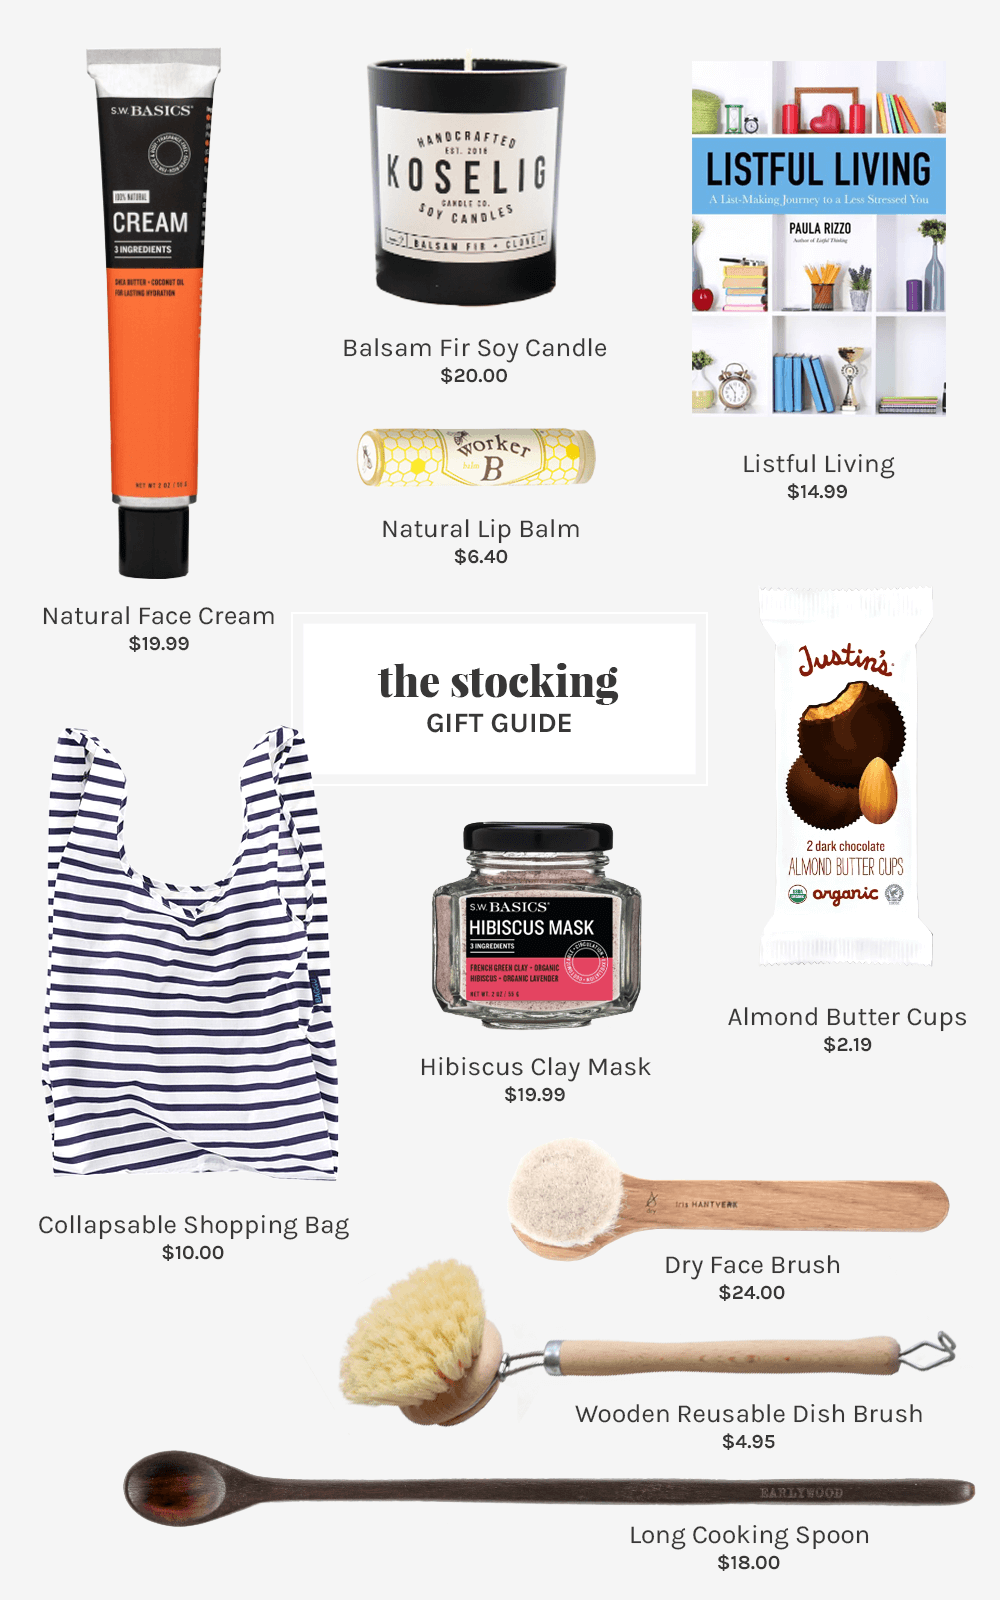 2019 Gift Guide for the stocking